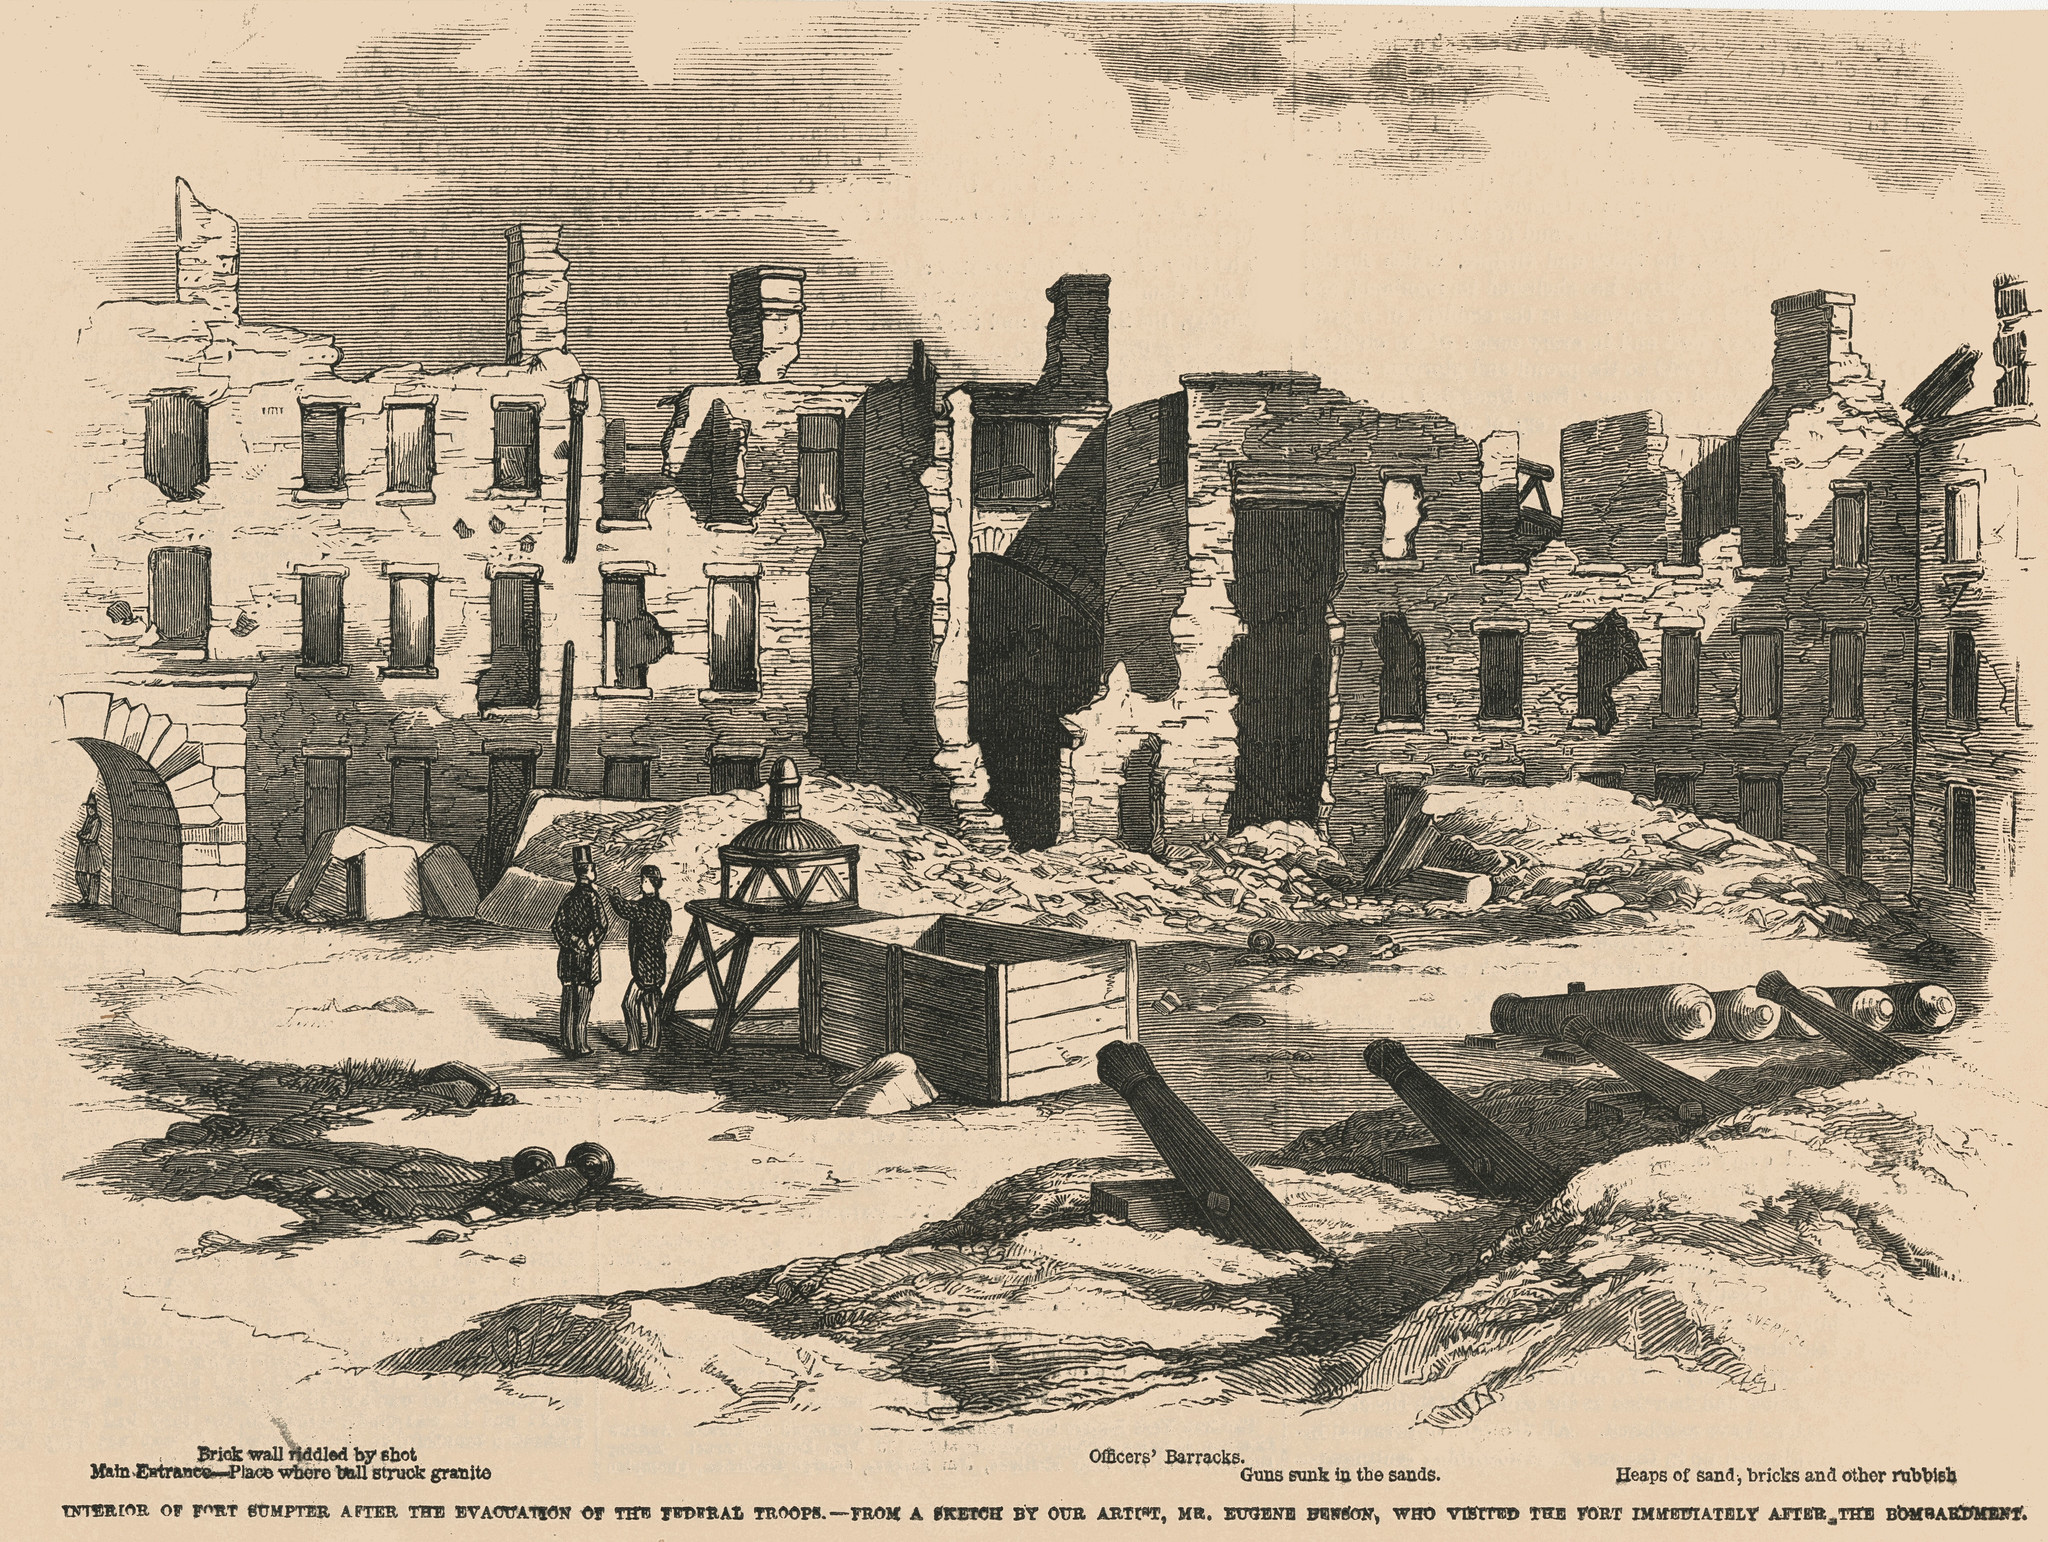 Interior of Fort Sumpter after the Evacuation of the Federal Troops—From a sketch by our Artist, Mr. Eugene Benson, Who Visited the Fort Immediately after the Bombardment